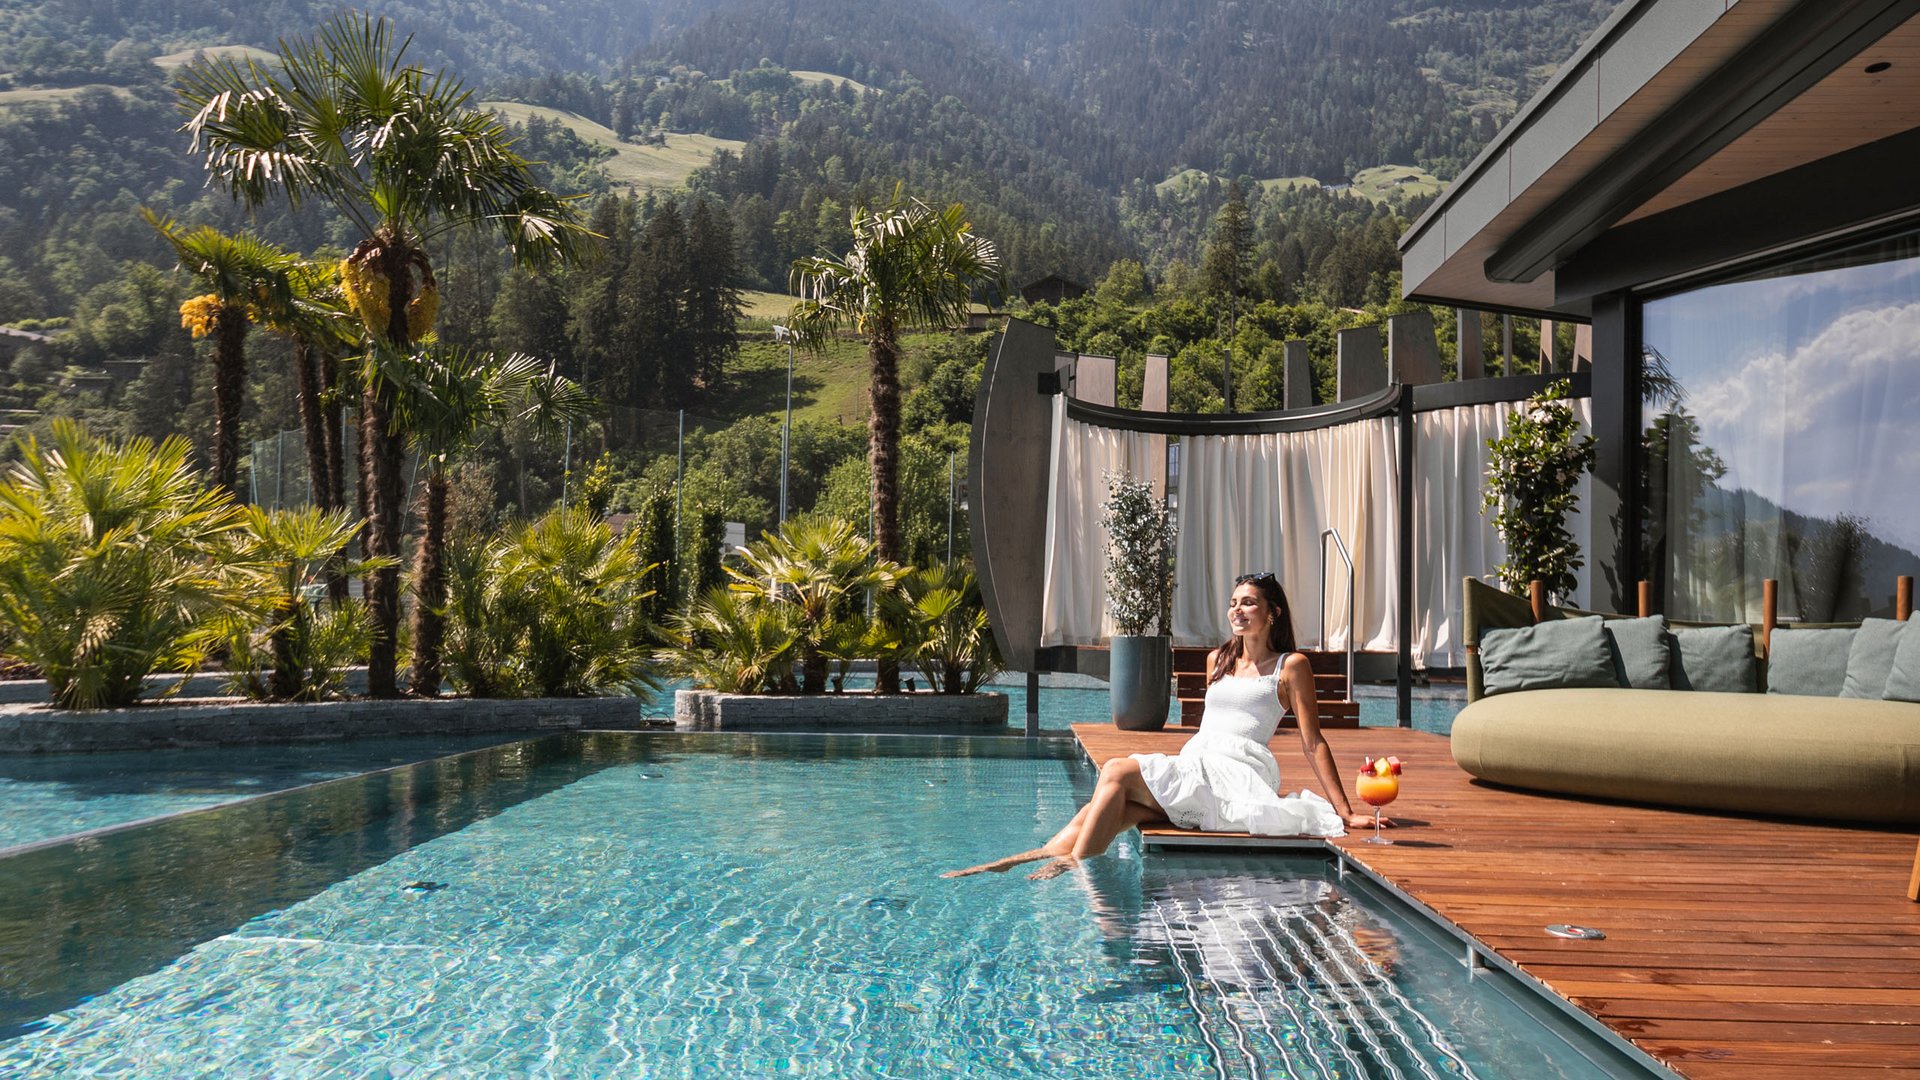 Your 5-star hotel in South Tyrol with every luxury